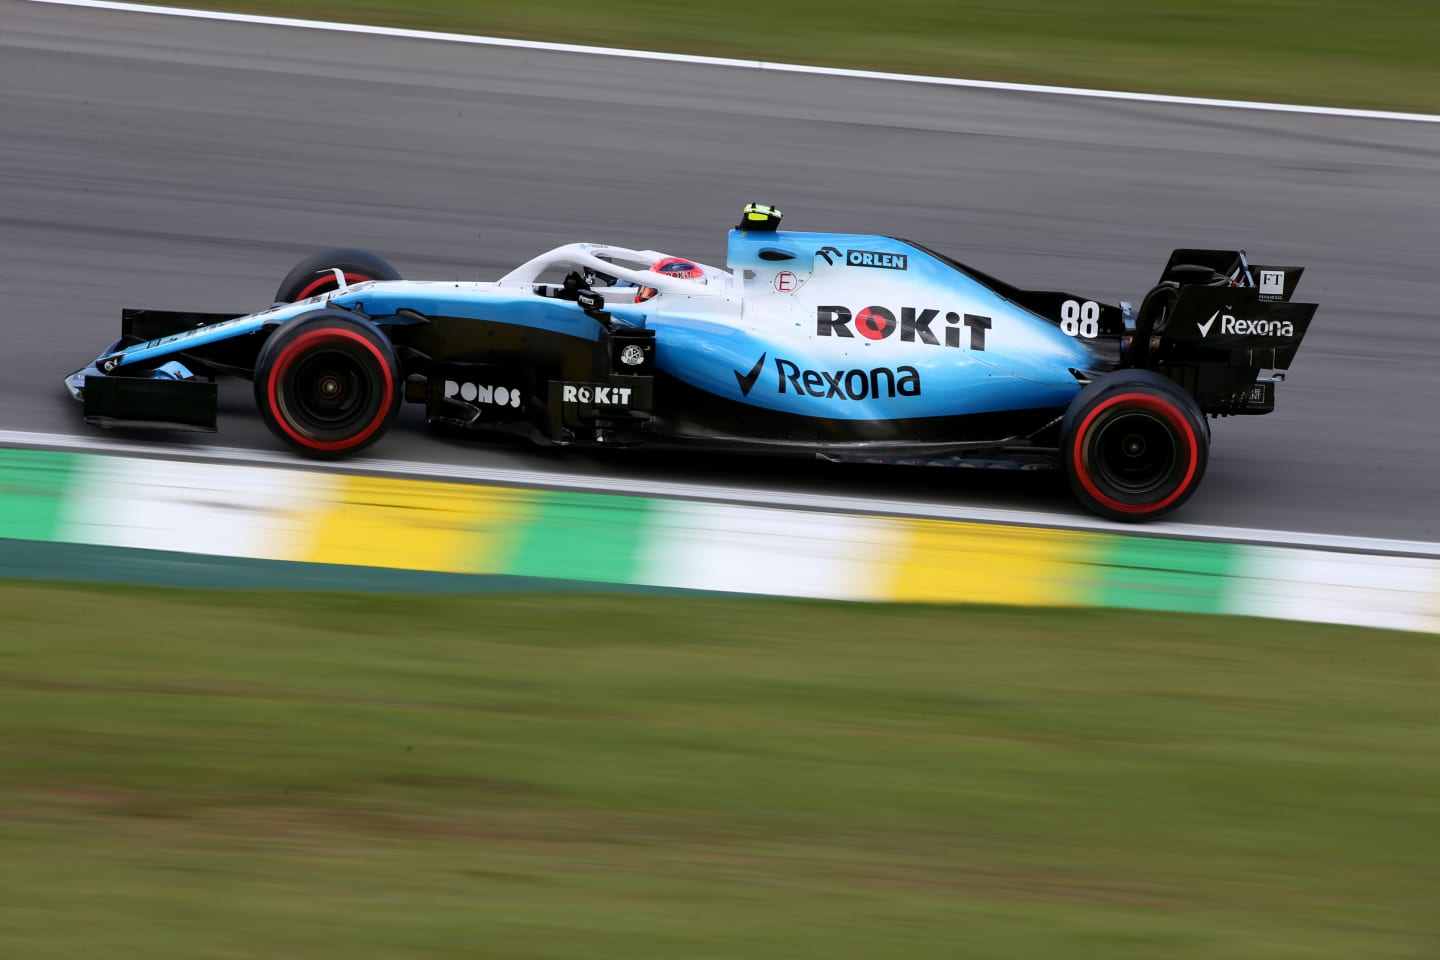 The 2019 Williams FW42 had prominent Rokit branding, but not as much red as the 2020 livery